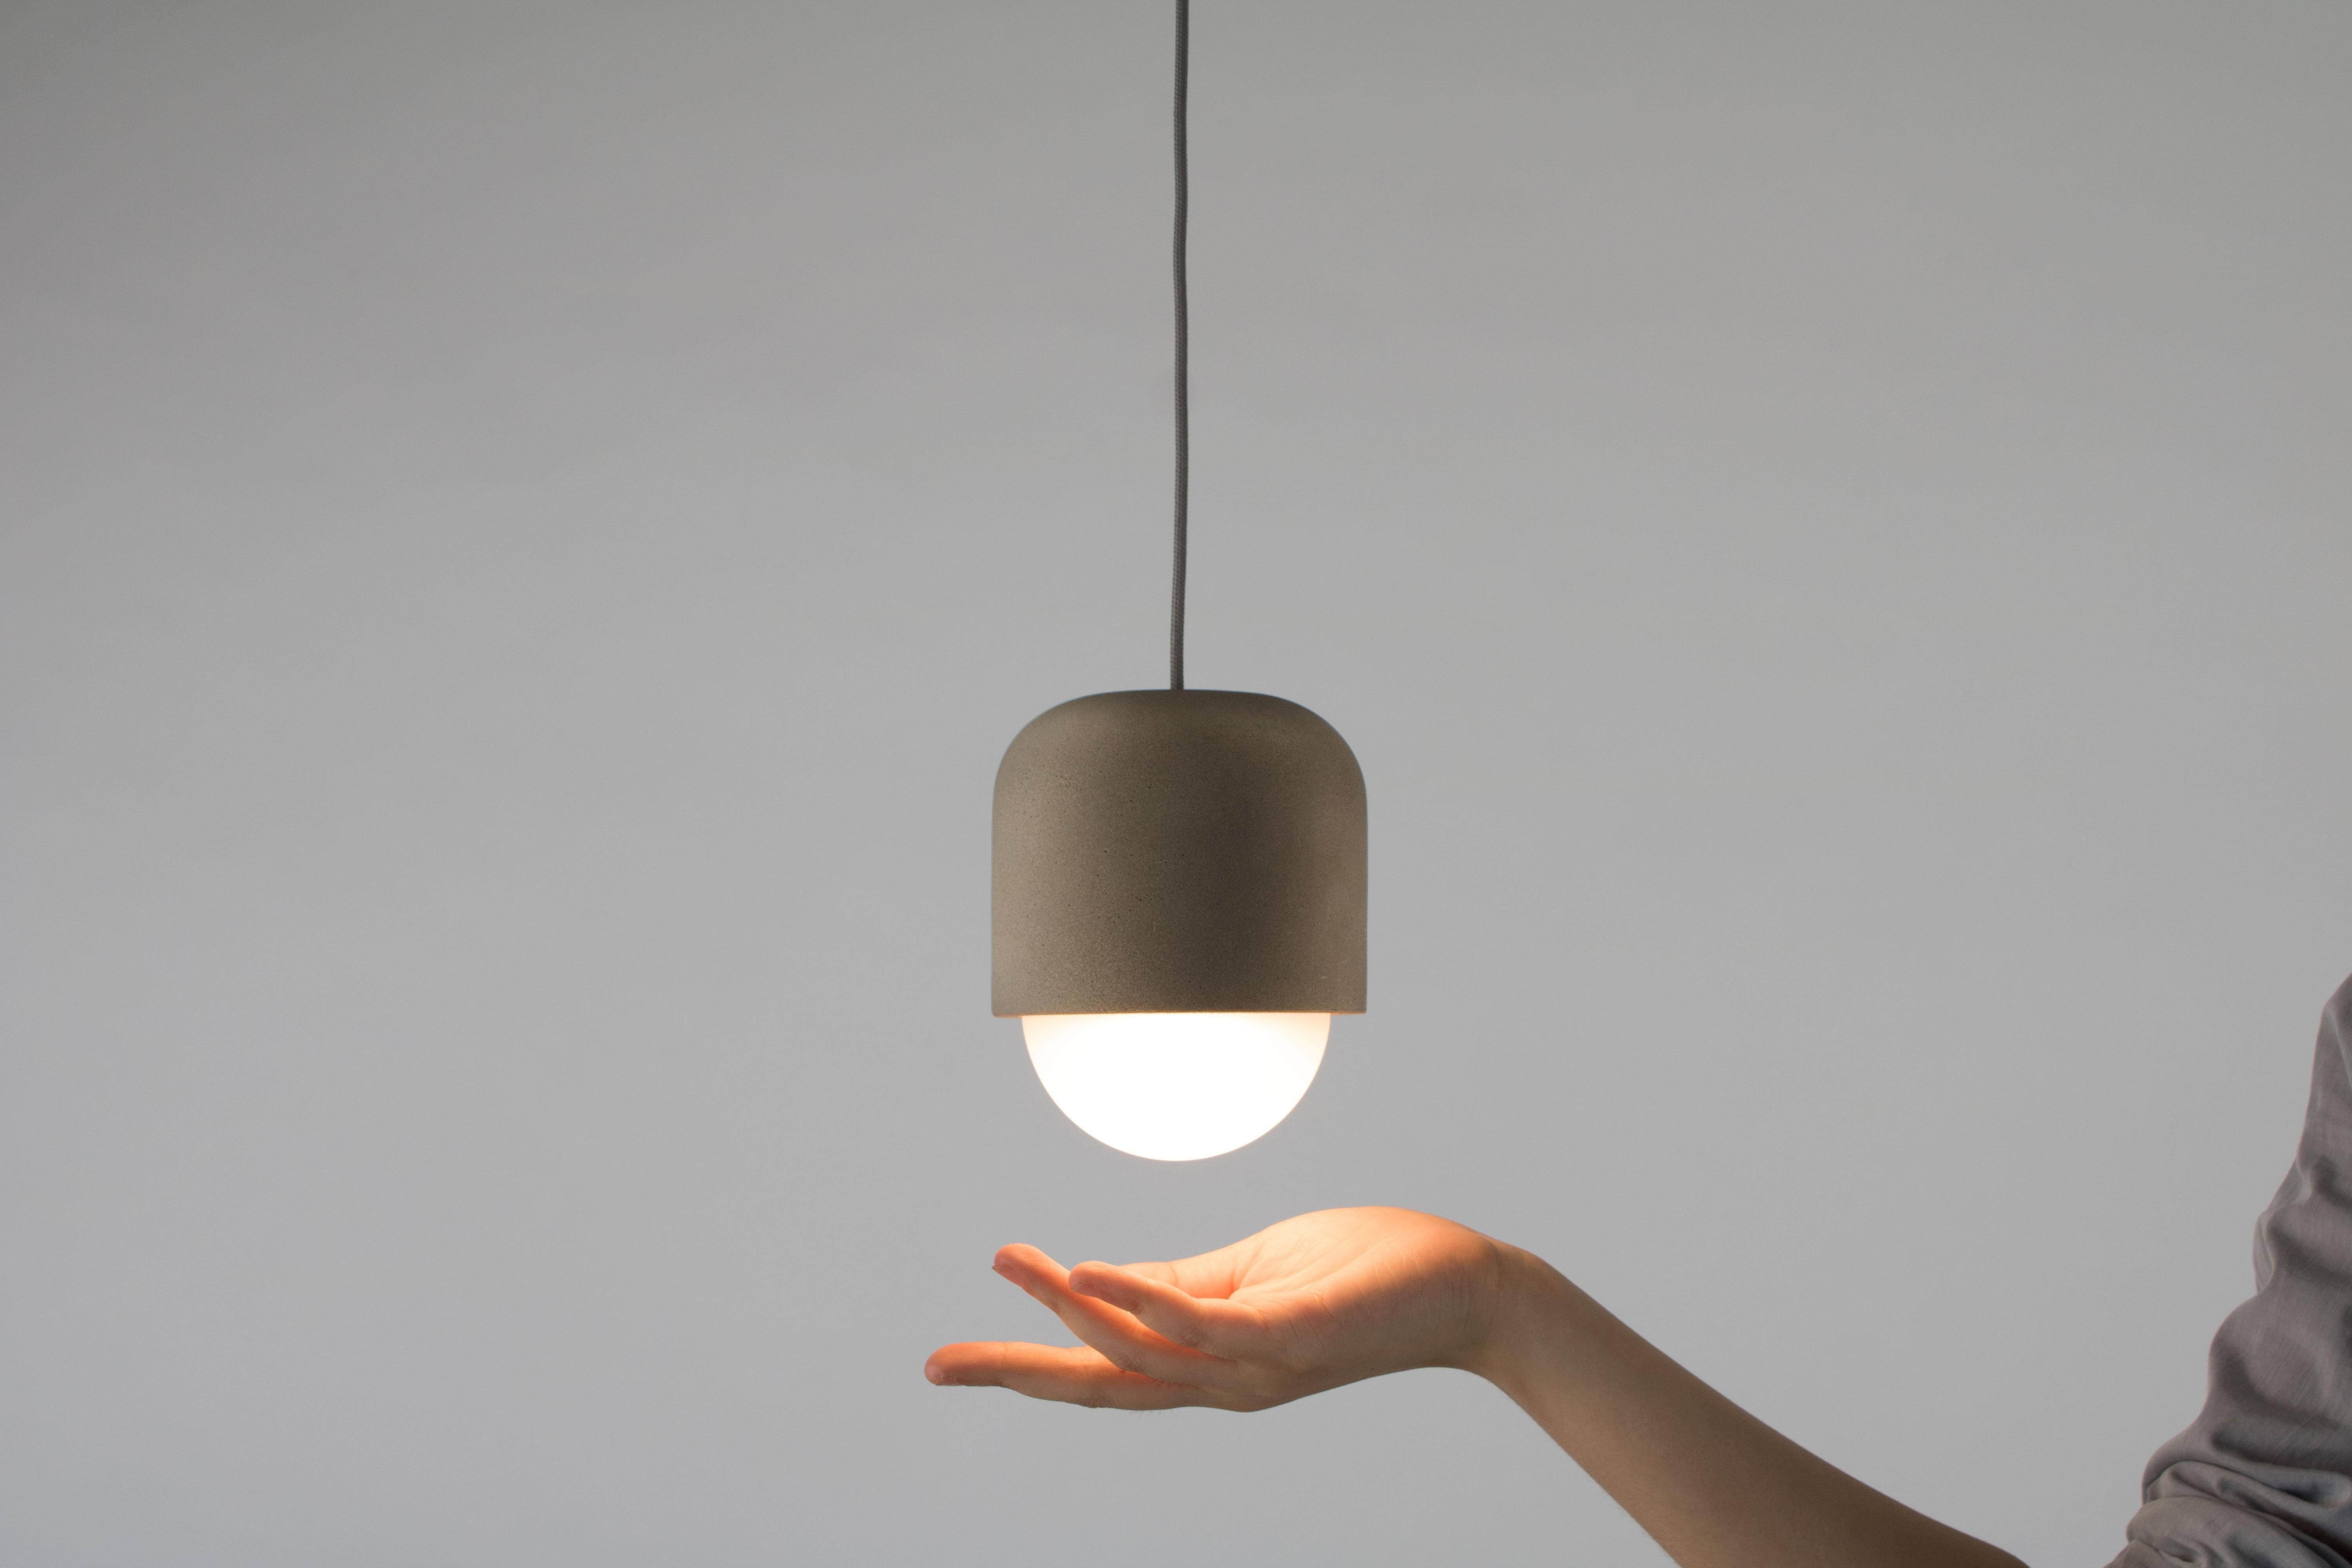 Castle Muse pendant desires to challenge your every perception of texture and lighting. As a material, concrete is exceptionally energy efficient compared to that of metal or glass. By using concrete as a lampshade the Castle has responsibly kept in